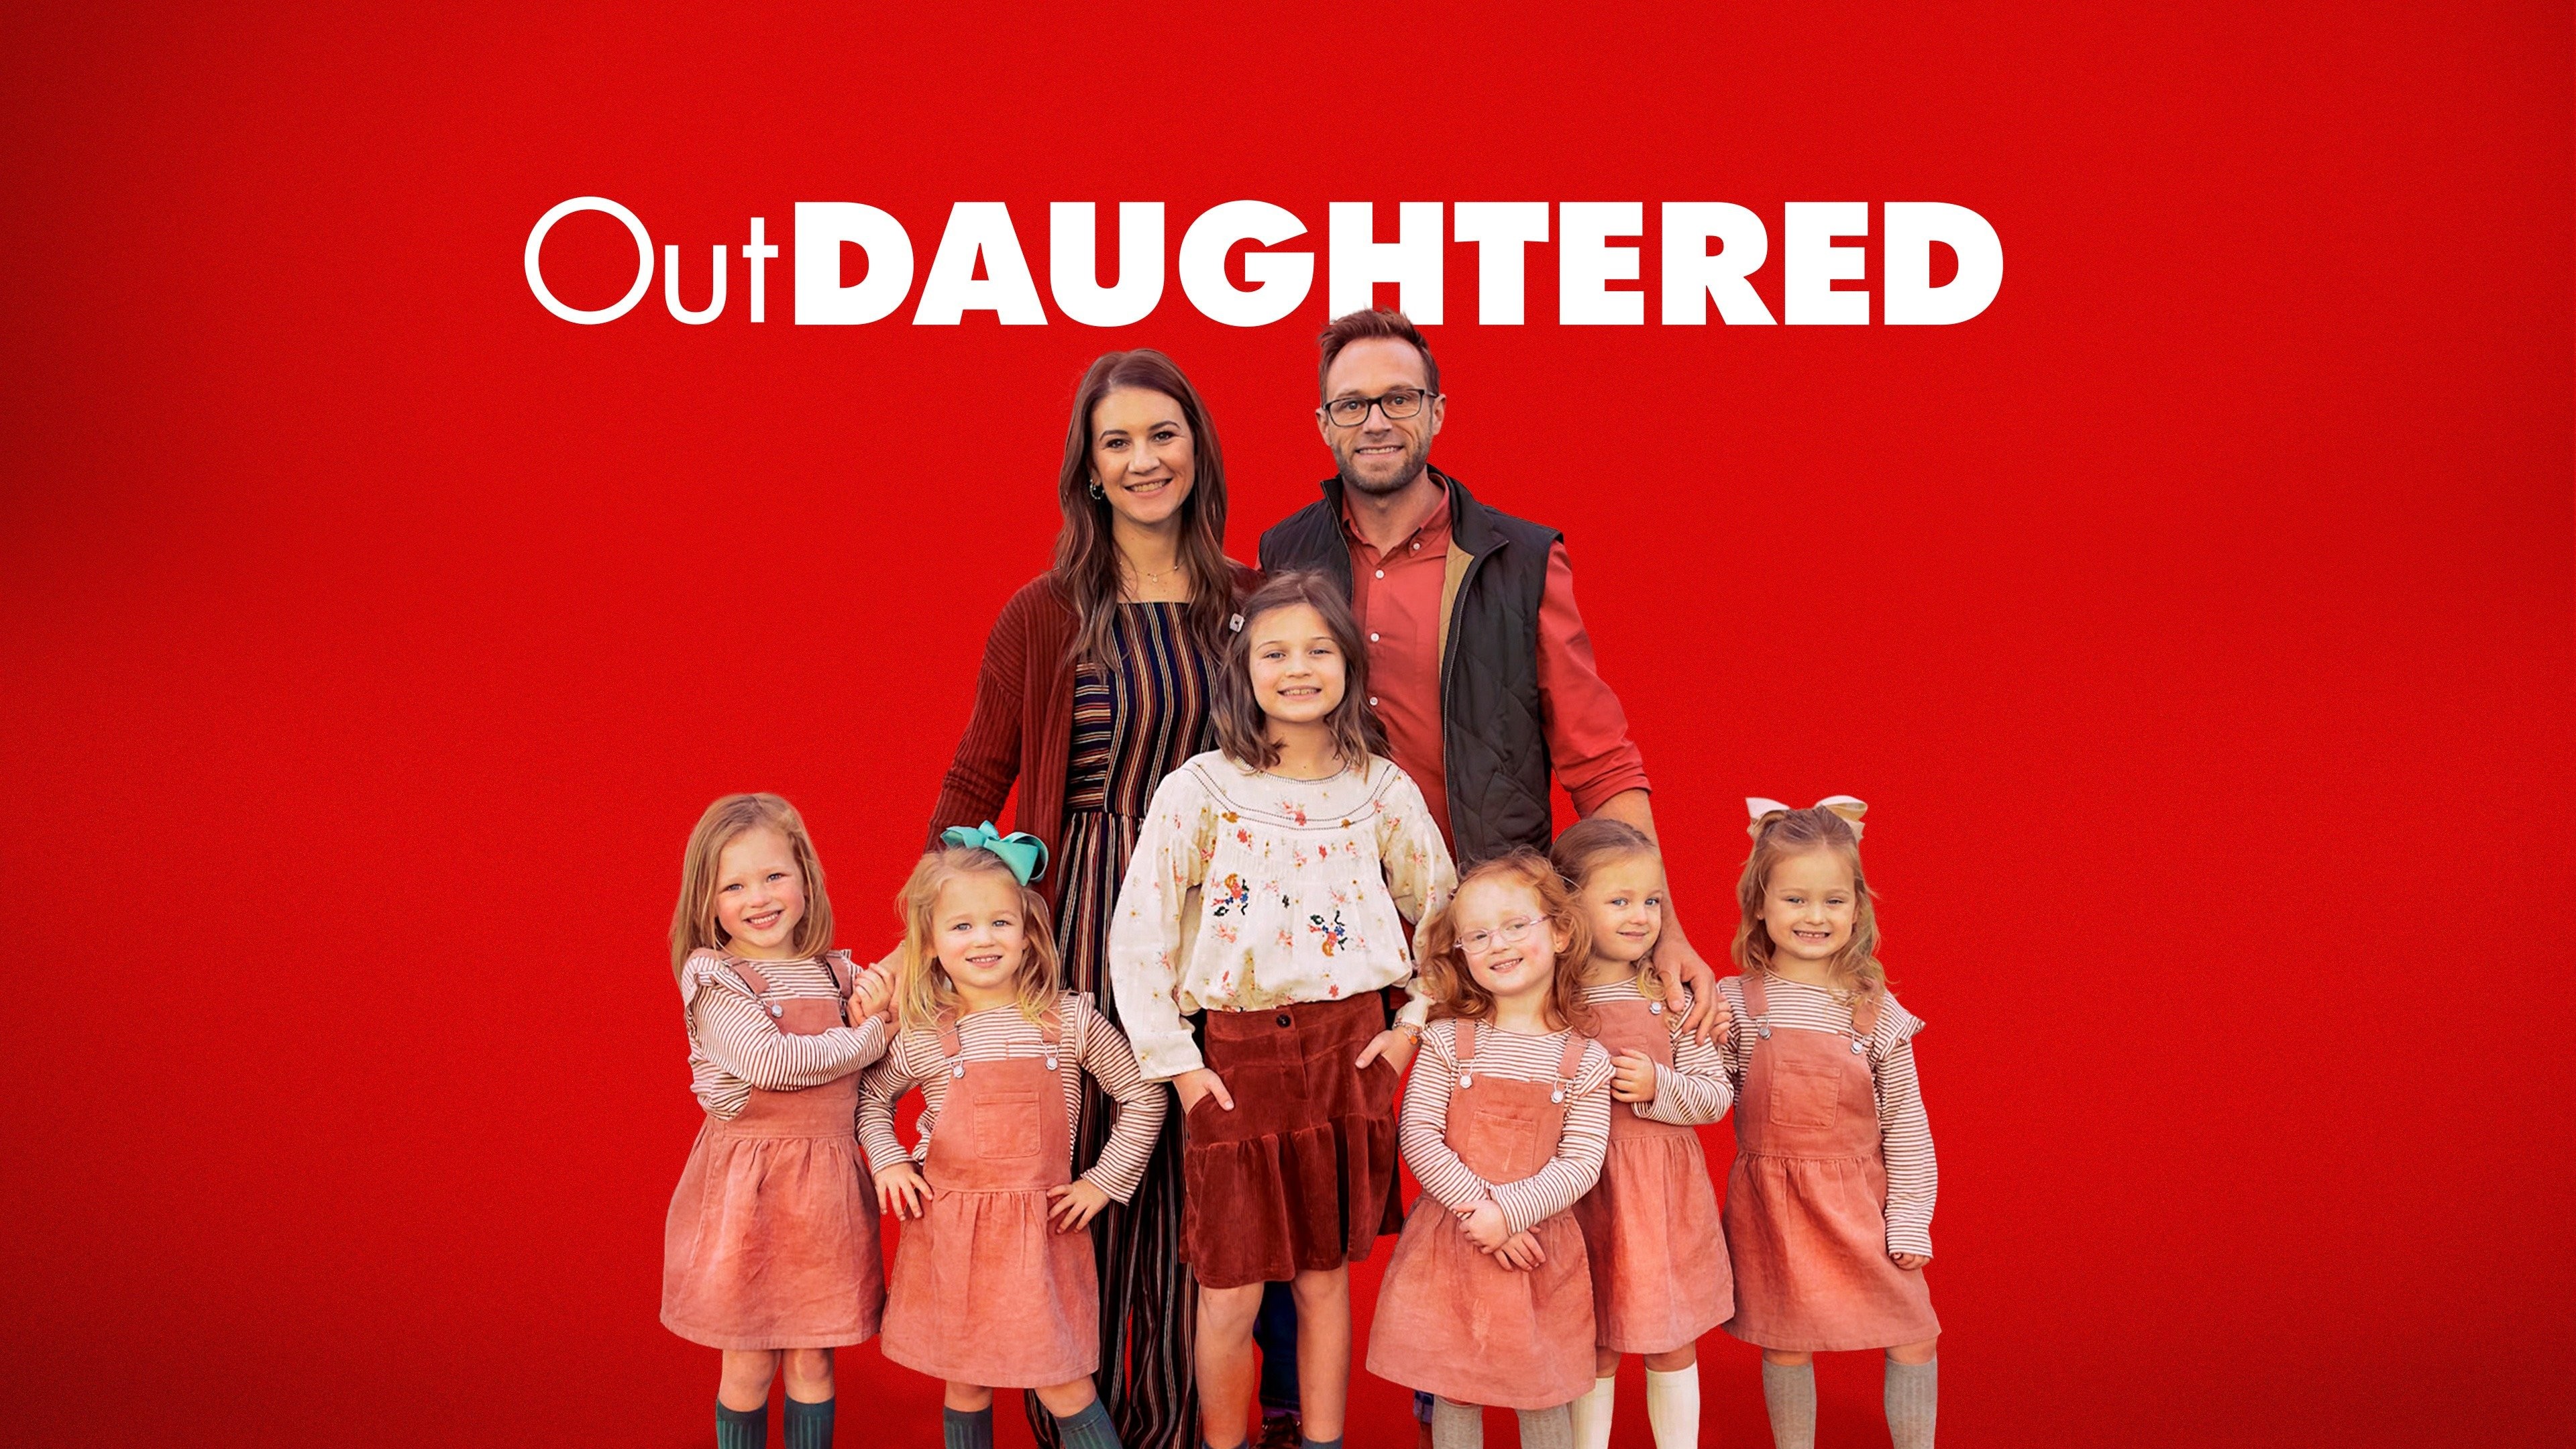 The Real Reason Fans Are Concerned About The OutDaughtered Kids